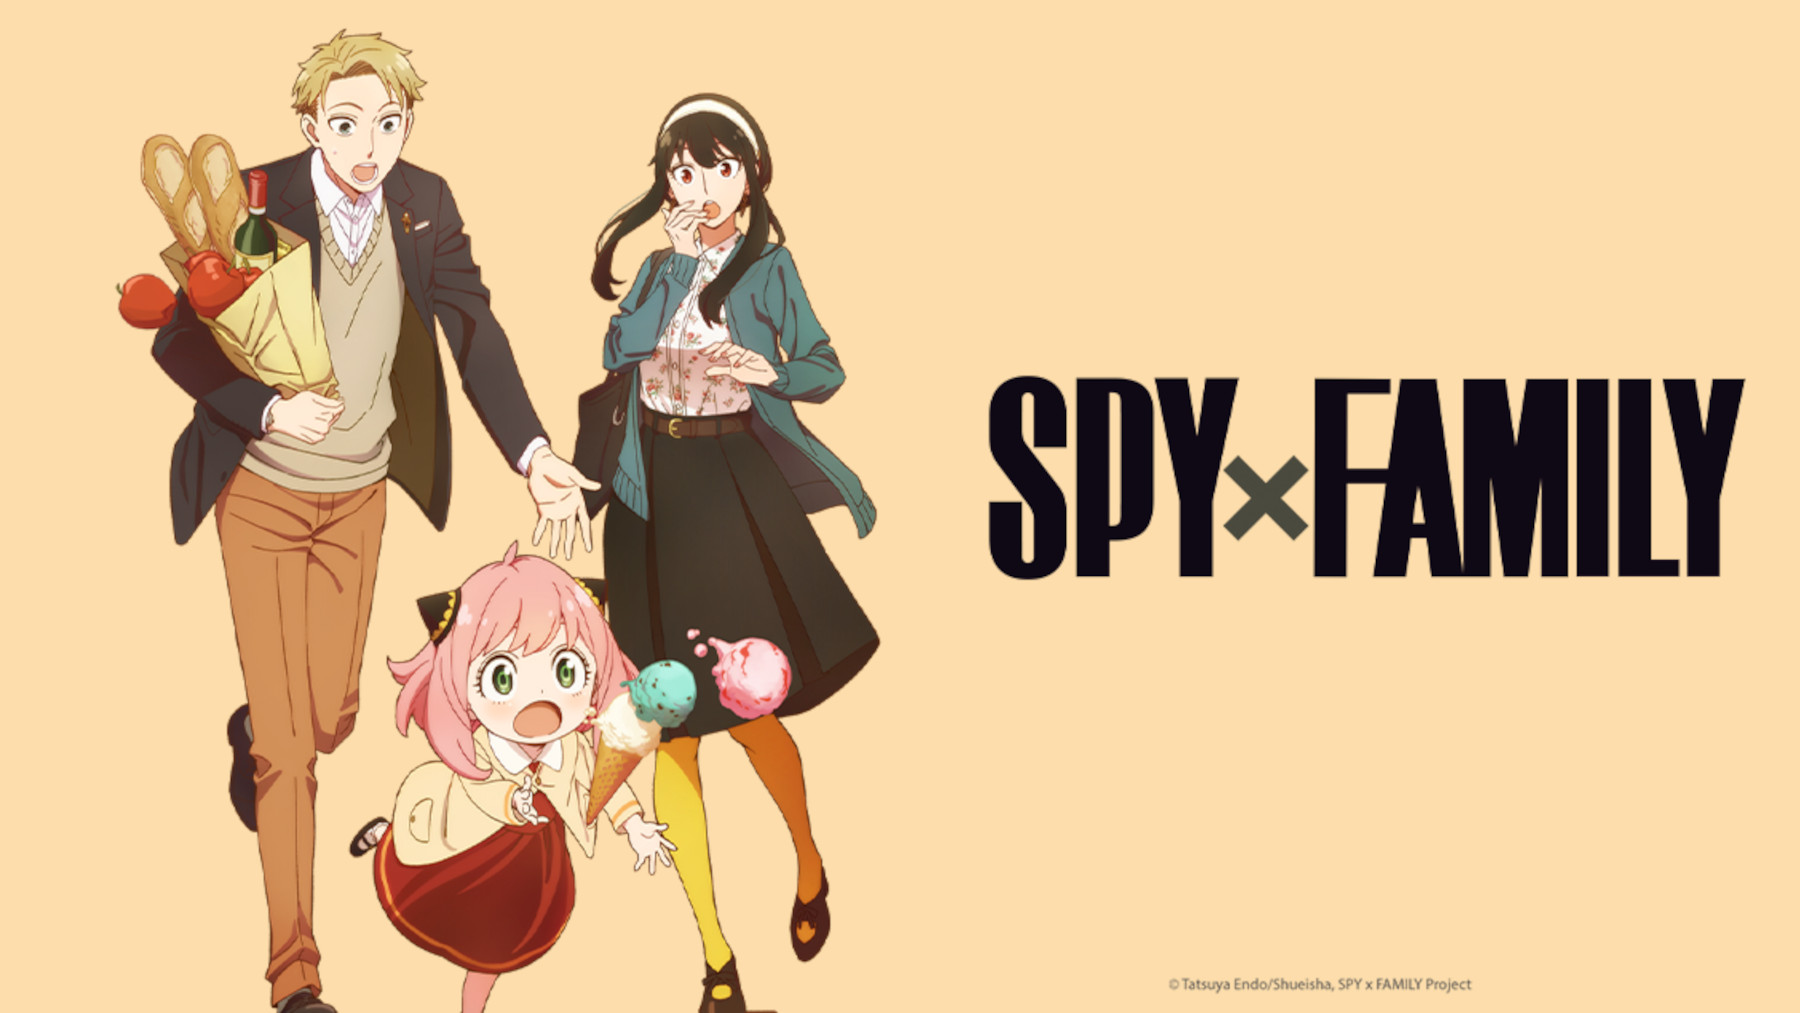 Crunchyroll Acquires Theatrical Rights for First Ever SPY x FAMILY Movie